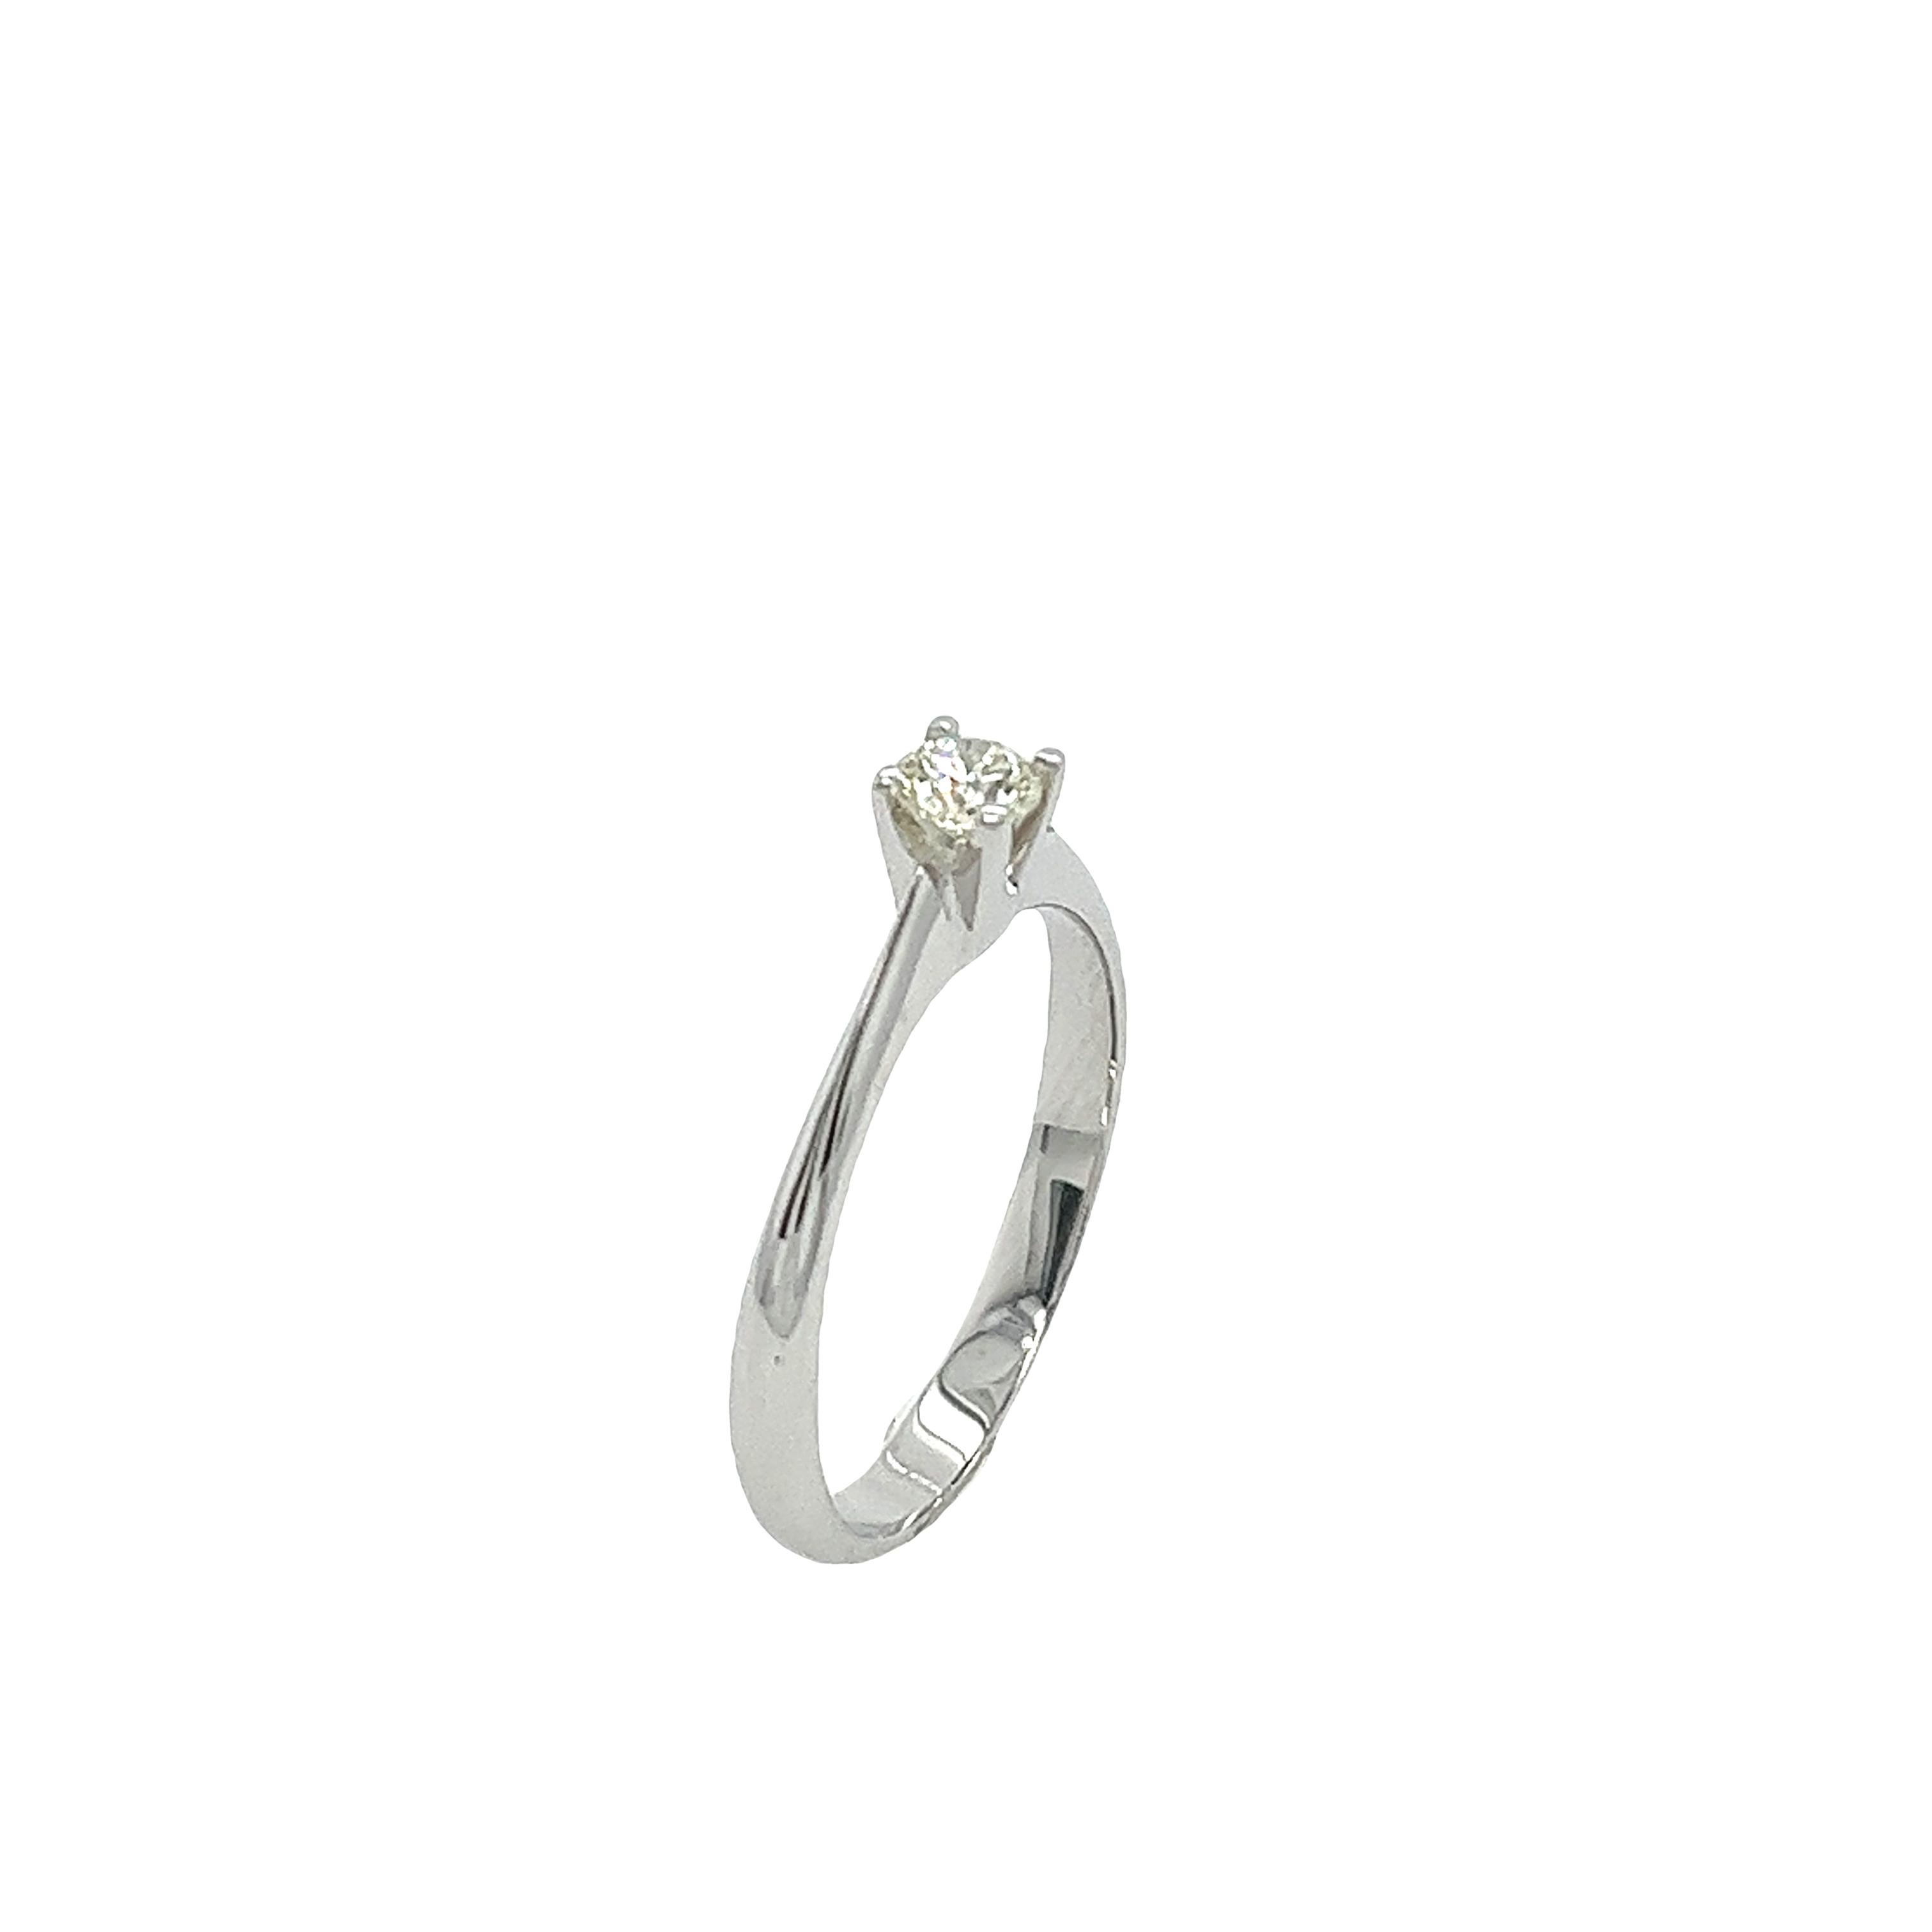 Round Cut Diamond Solitaire Ring Set With 0.16ct I/SI1 Round Diamond in 18ct White Gold For Sale